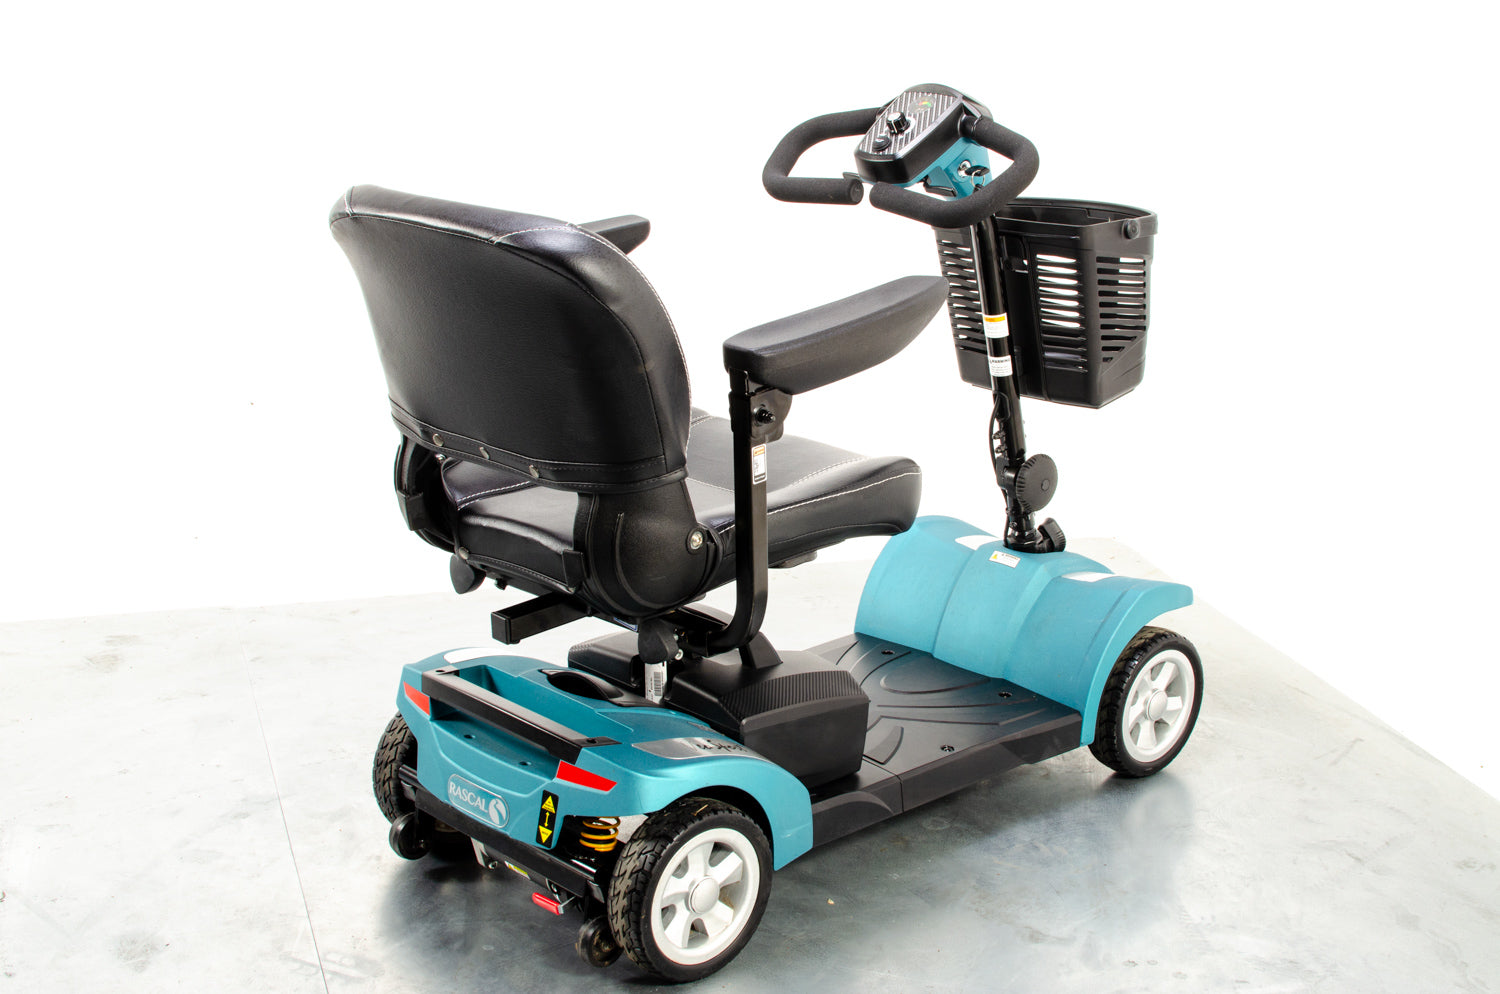 2019 Rascal Veo Sport Used Electric Mobility Scooter 4mph Transportable Teal